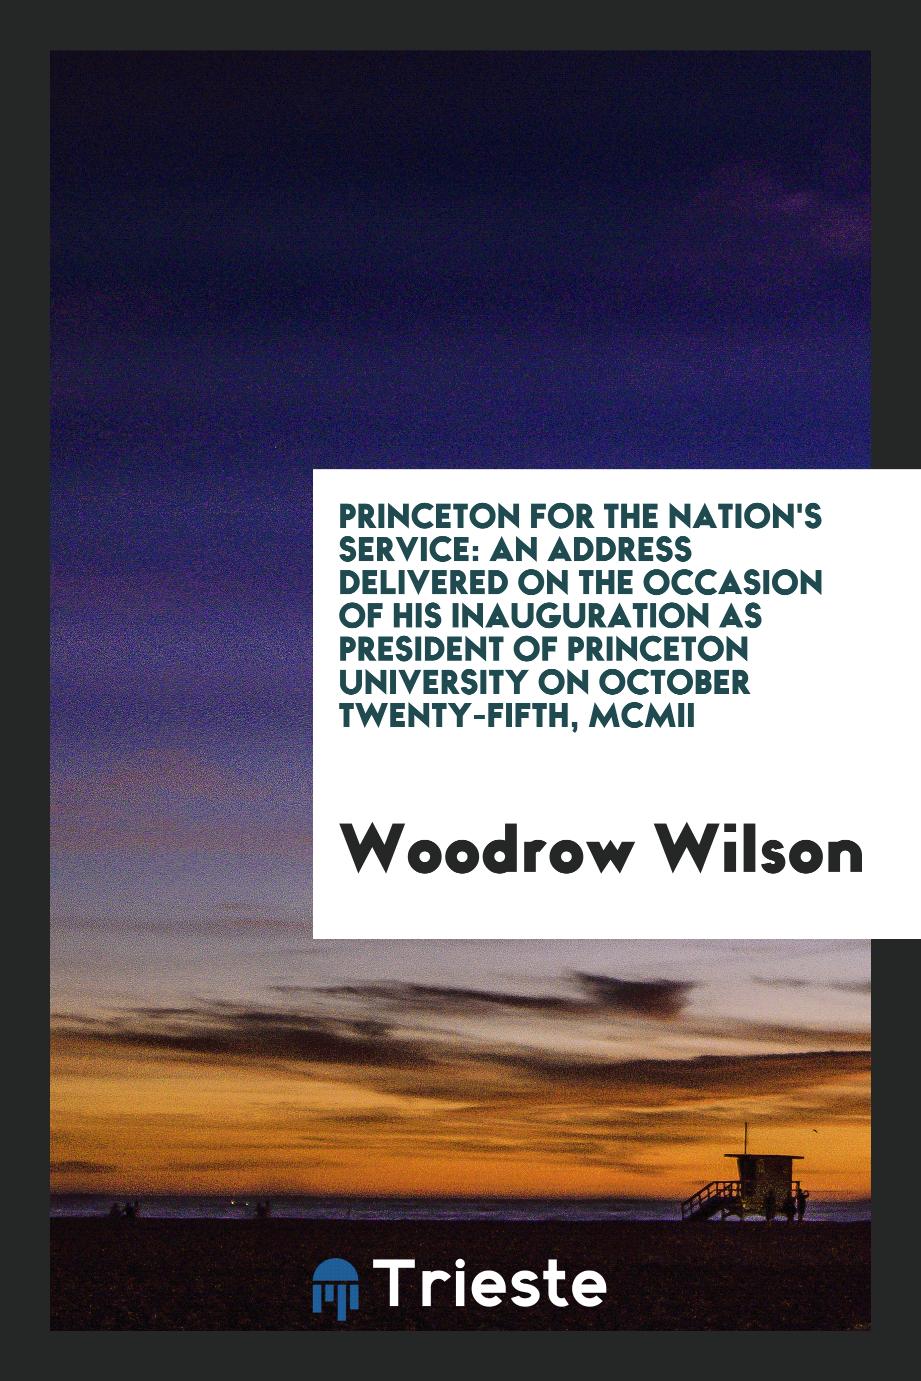 Princeton for the nation's service: an address delivered on the occasion of his inauguration as president of Princeton university on October twenty-fifth, MCMII